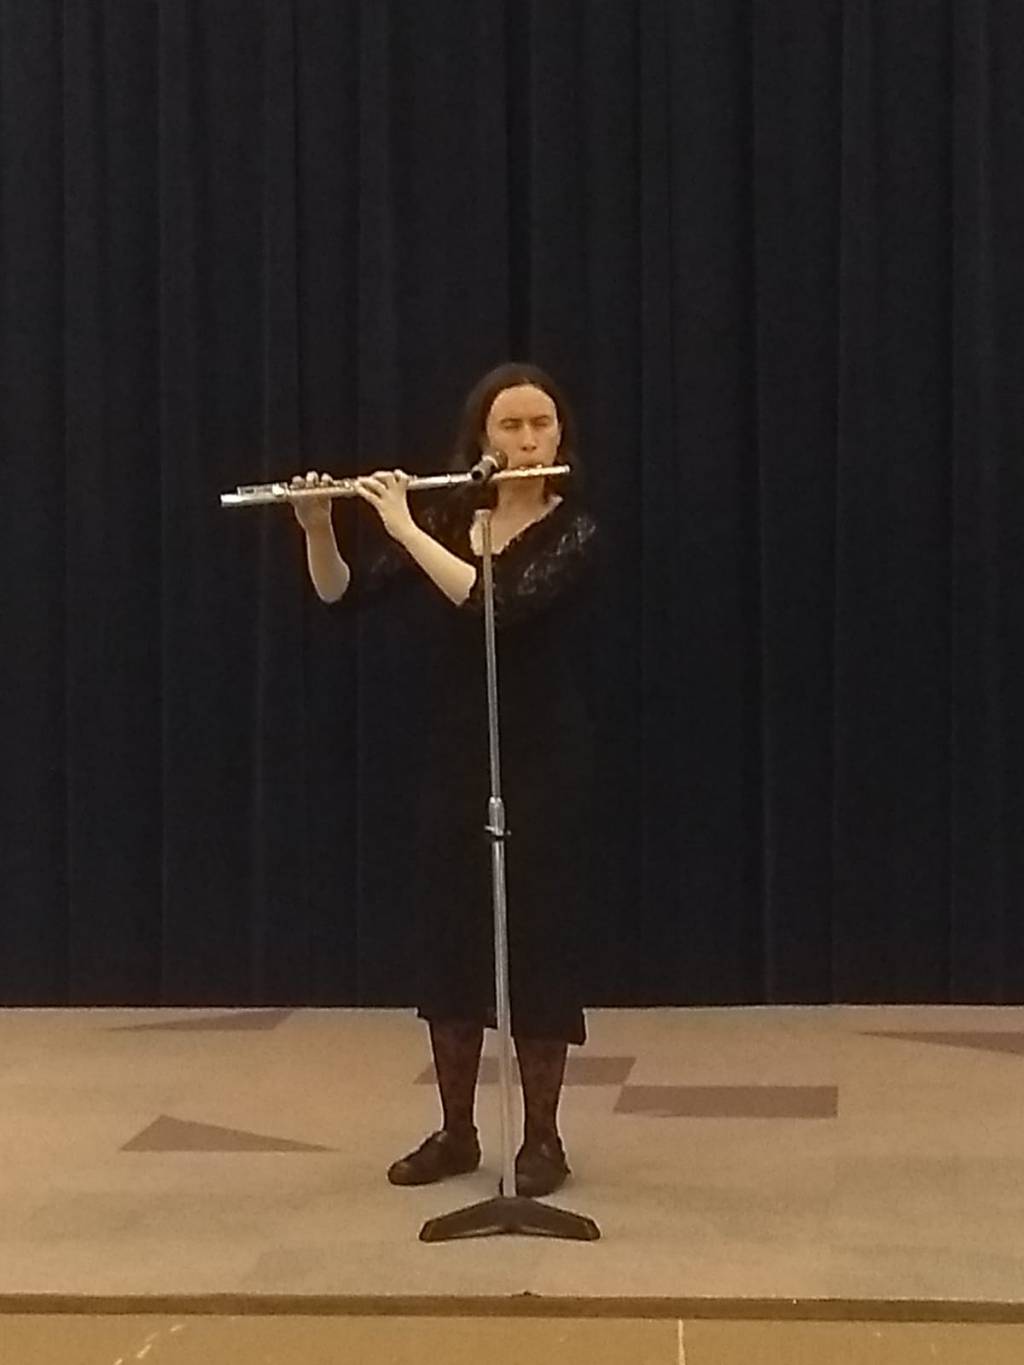 I, a European-presening white woman, am wearing a black dress playing flute. You can see the stage, a microphone I'm playing into, and a black curtain behind me.